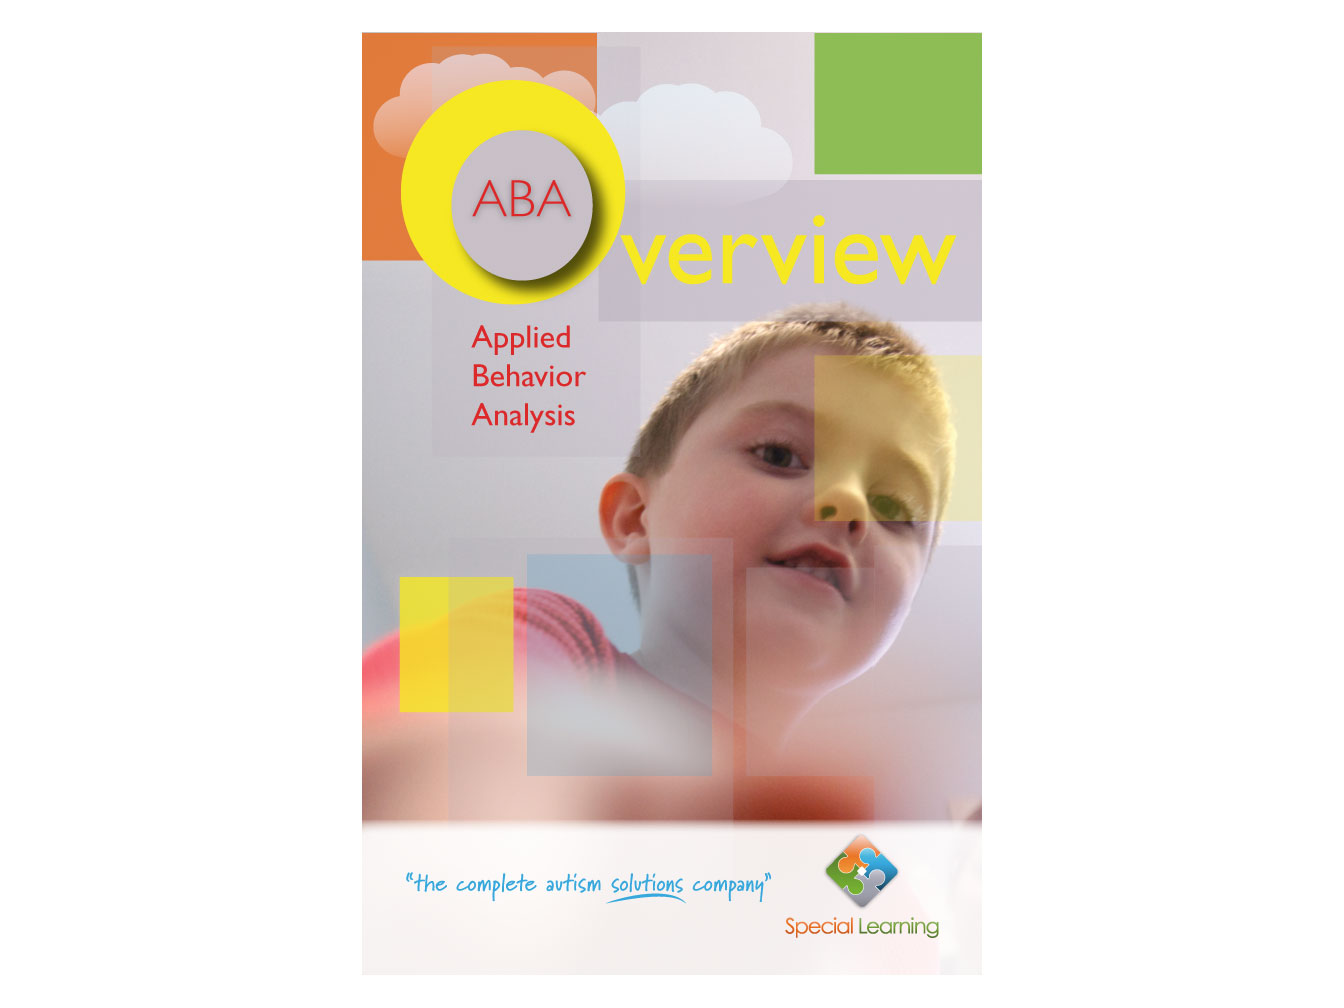 ABA Overview Book Cover Design